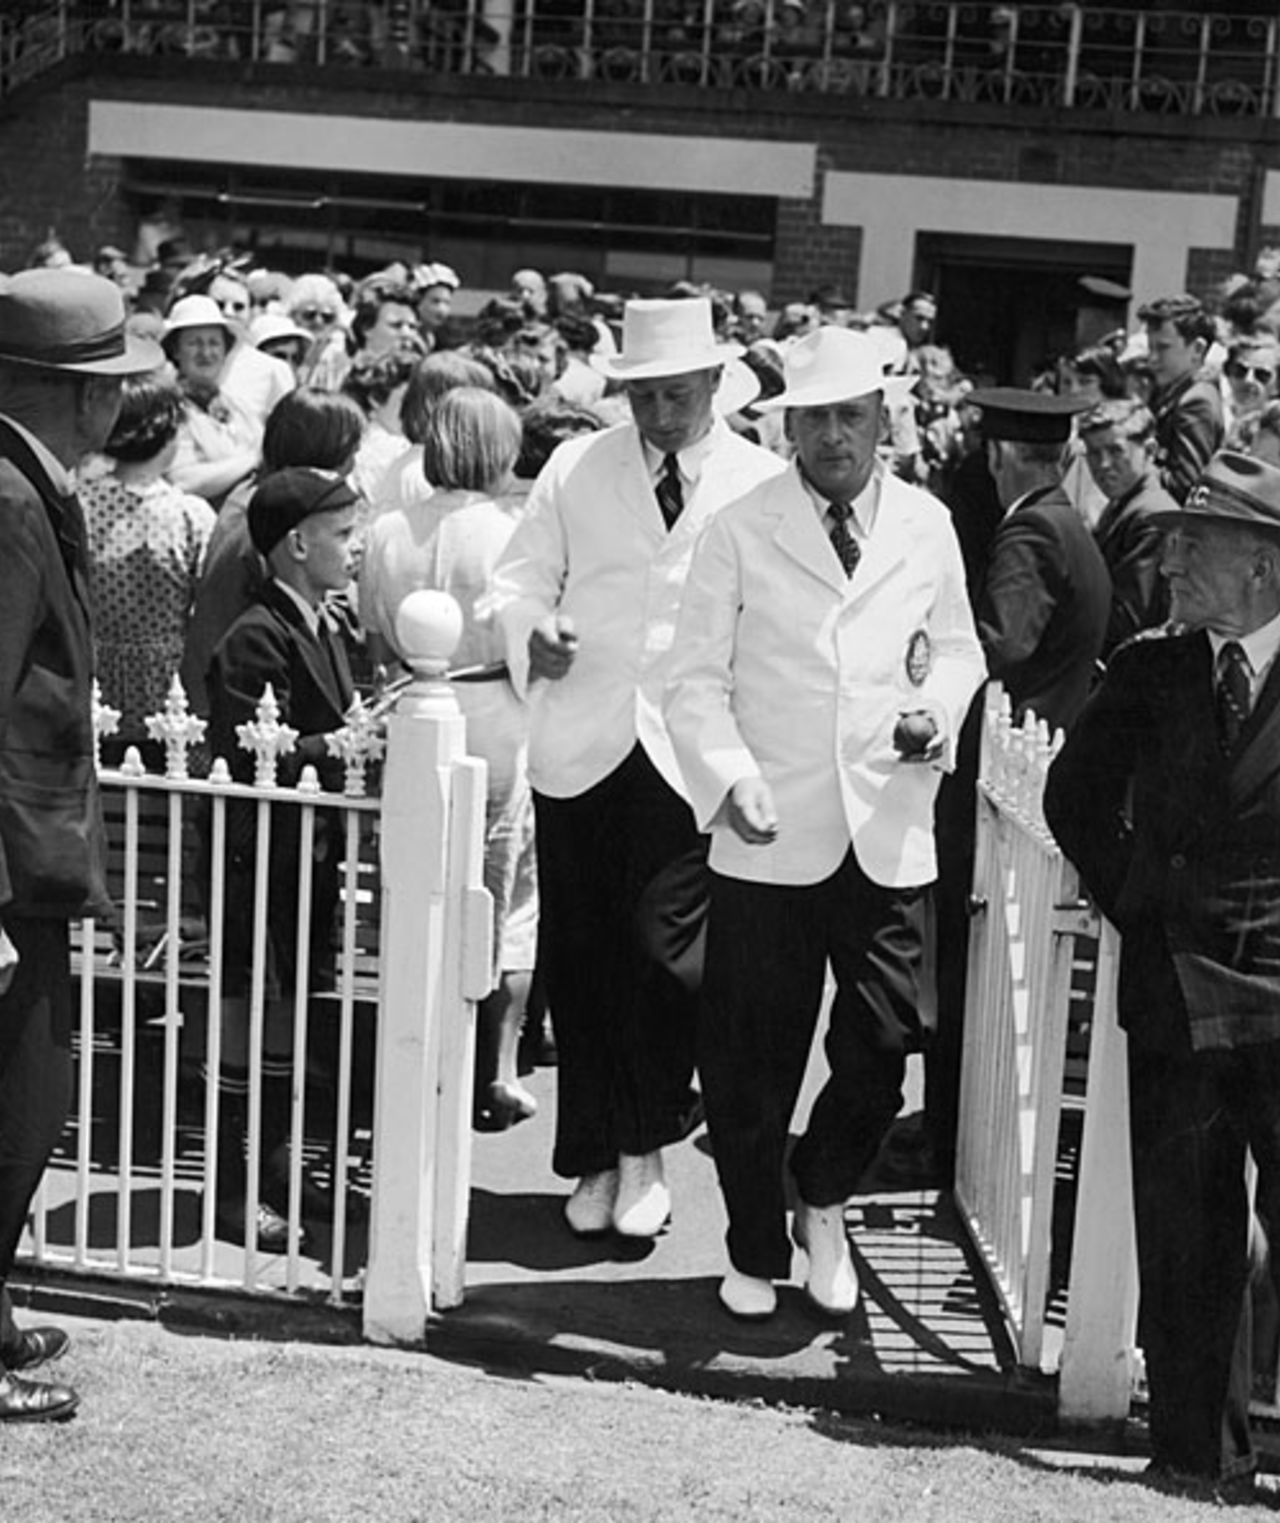 Umpires Ronald Wright and George Cooper walk on to the field on Boxing Day, Australia v England, MCG, 3rd day, December 26, 1950